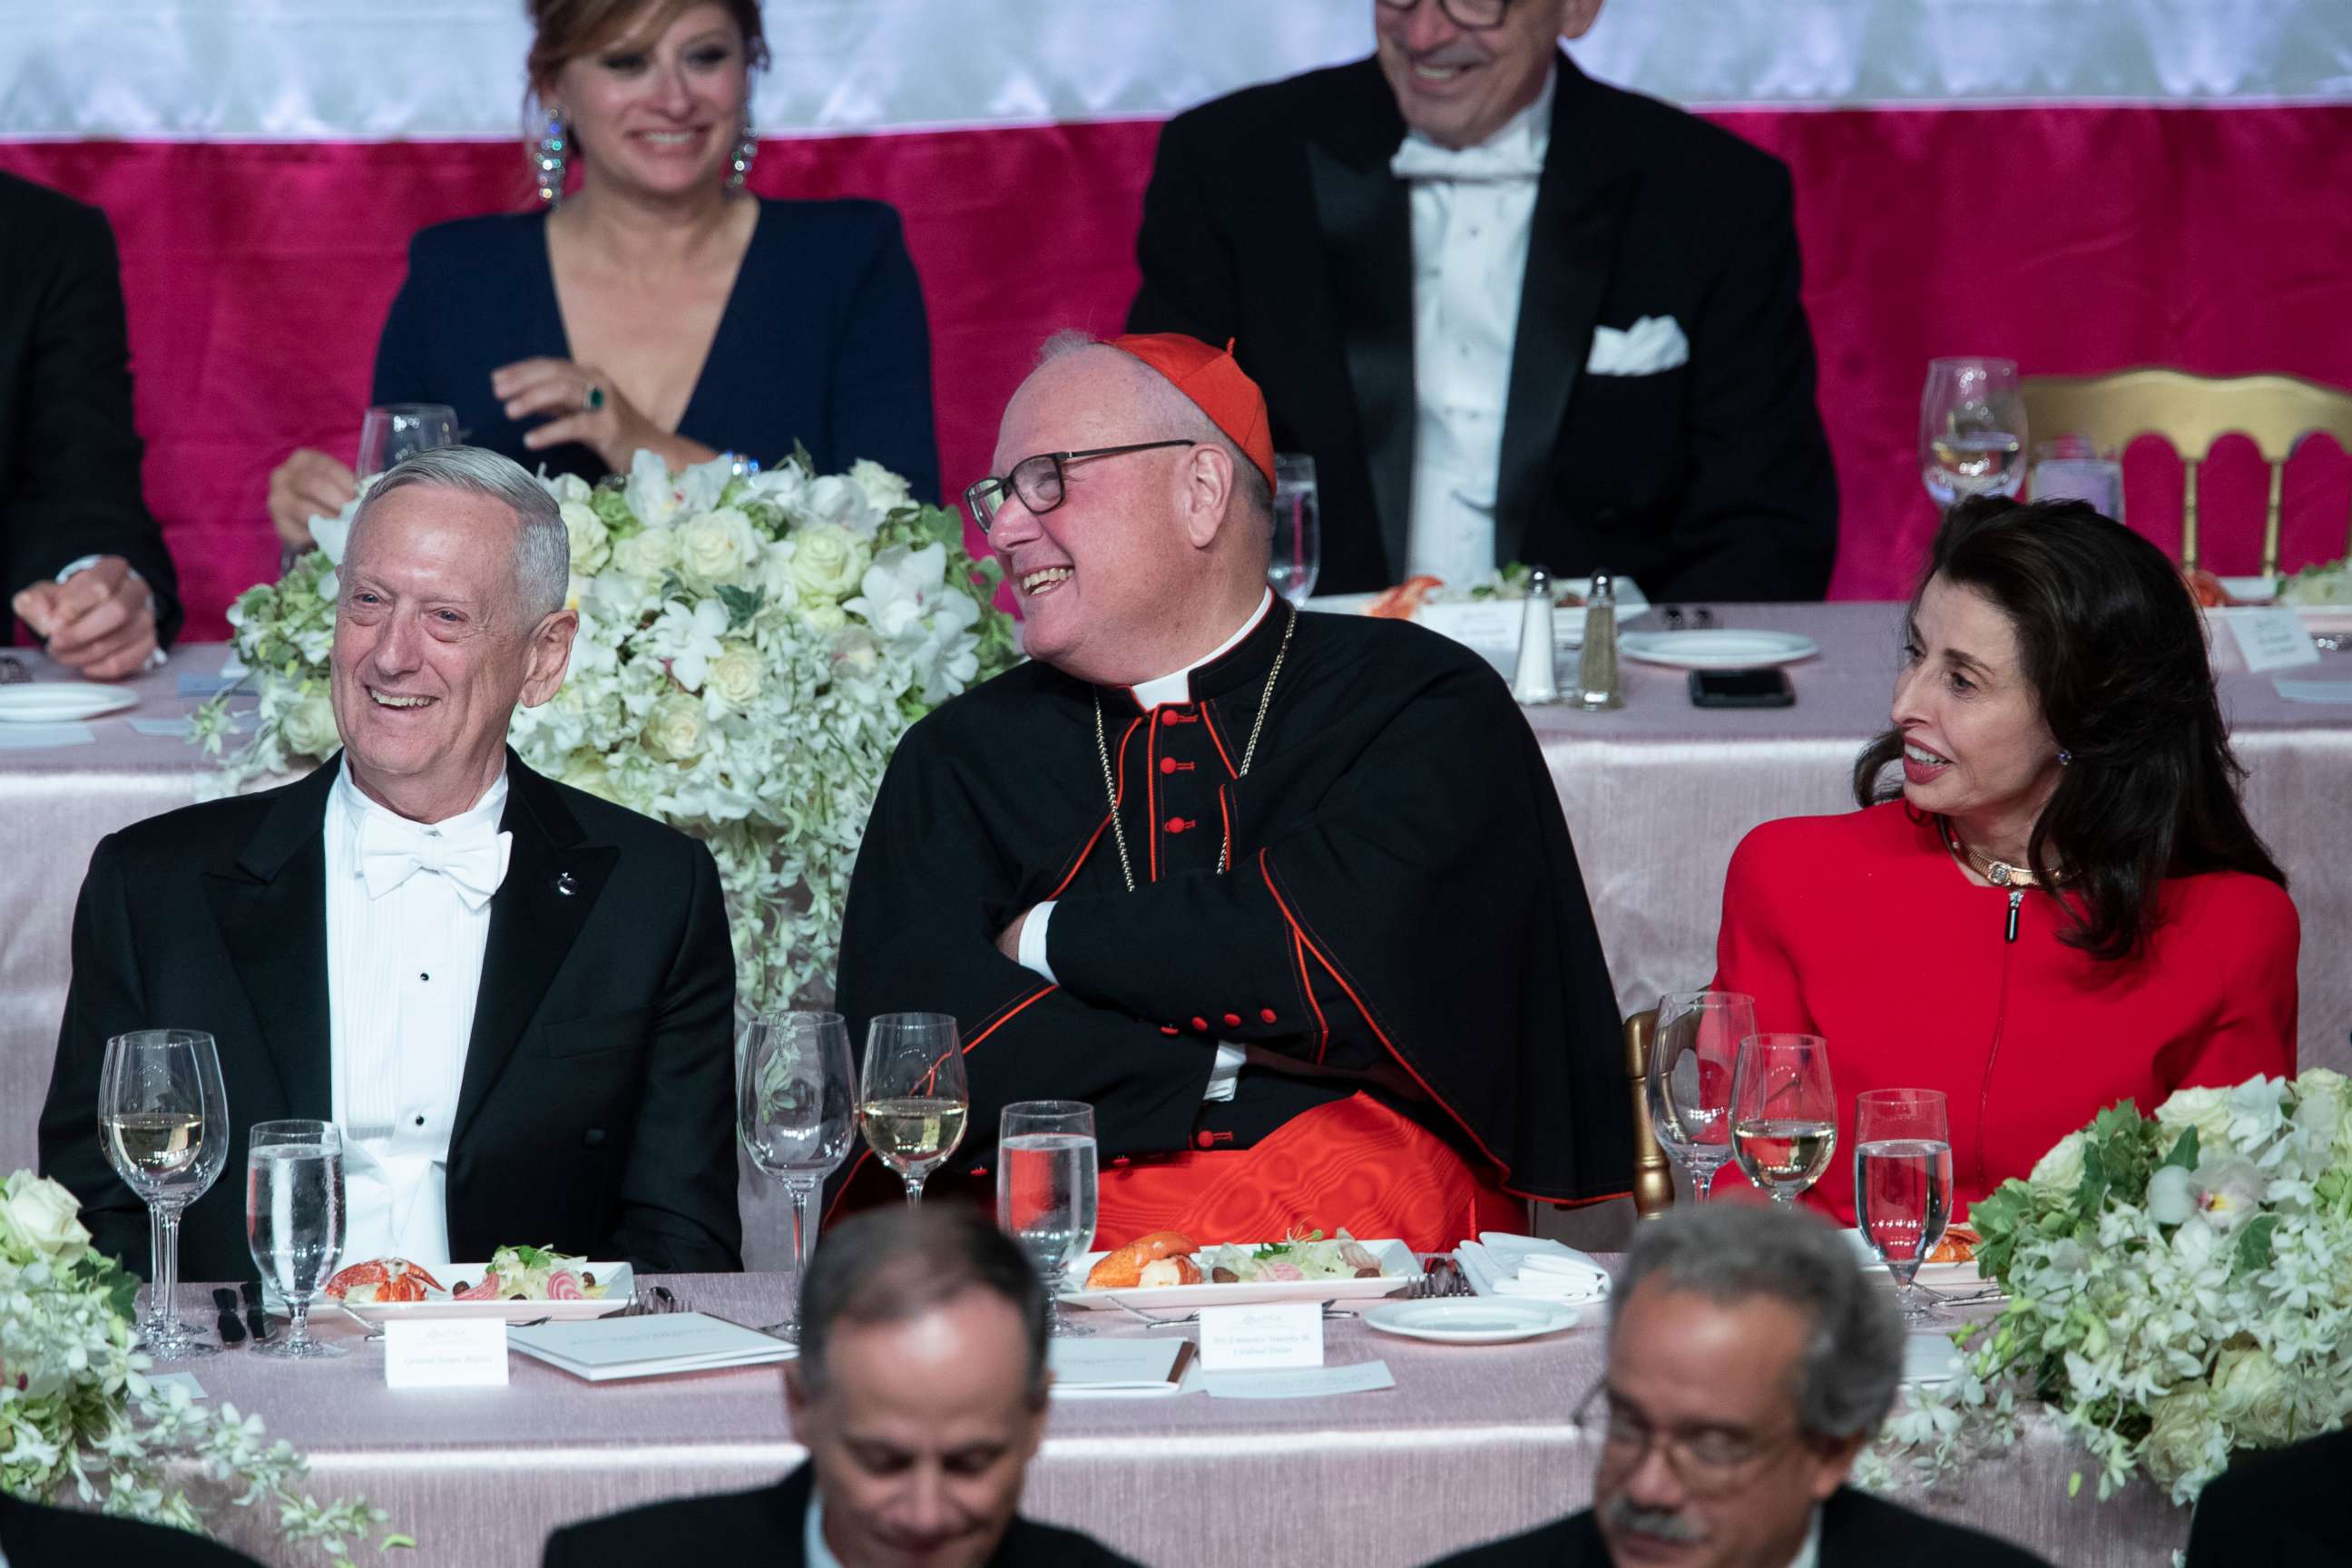 PHOTO: Former U.S. Secretary of Defense Jim Mattis, left, Cardinal Timothy Dolan, center, and Happy Warrior Award Recipient Mary Ann Tighe react to opening remarks during the 74th Annual Alfred E. Smith Dinner, Thursday, Oct. 17, 2019, in New York.